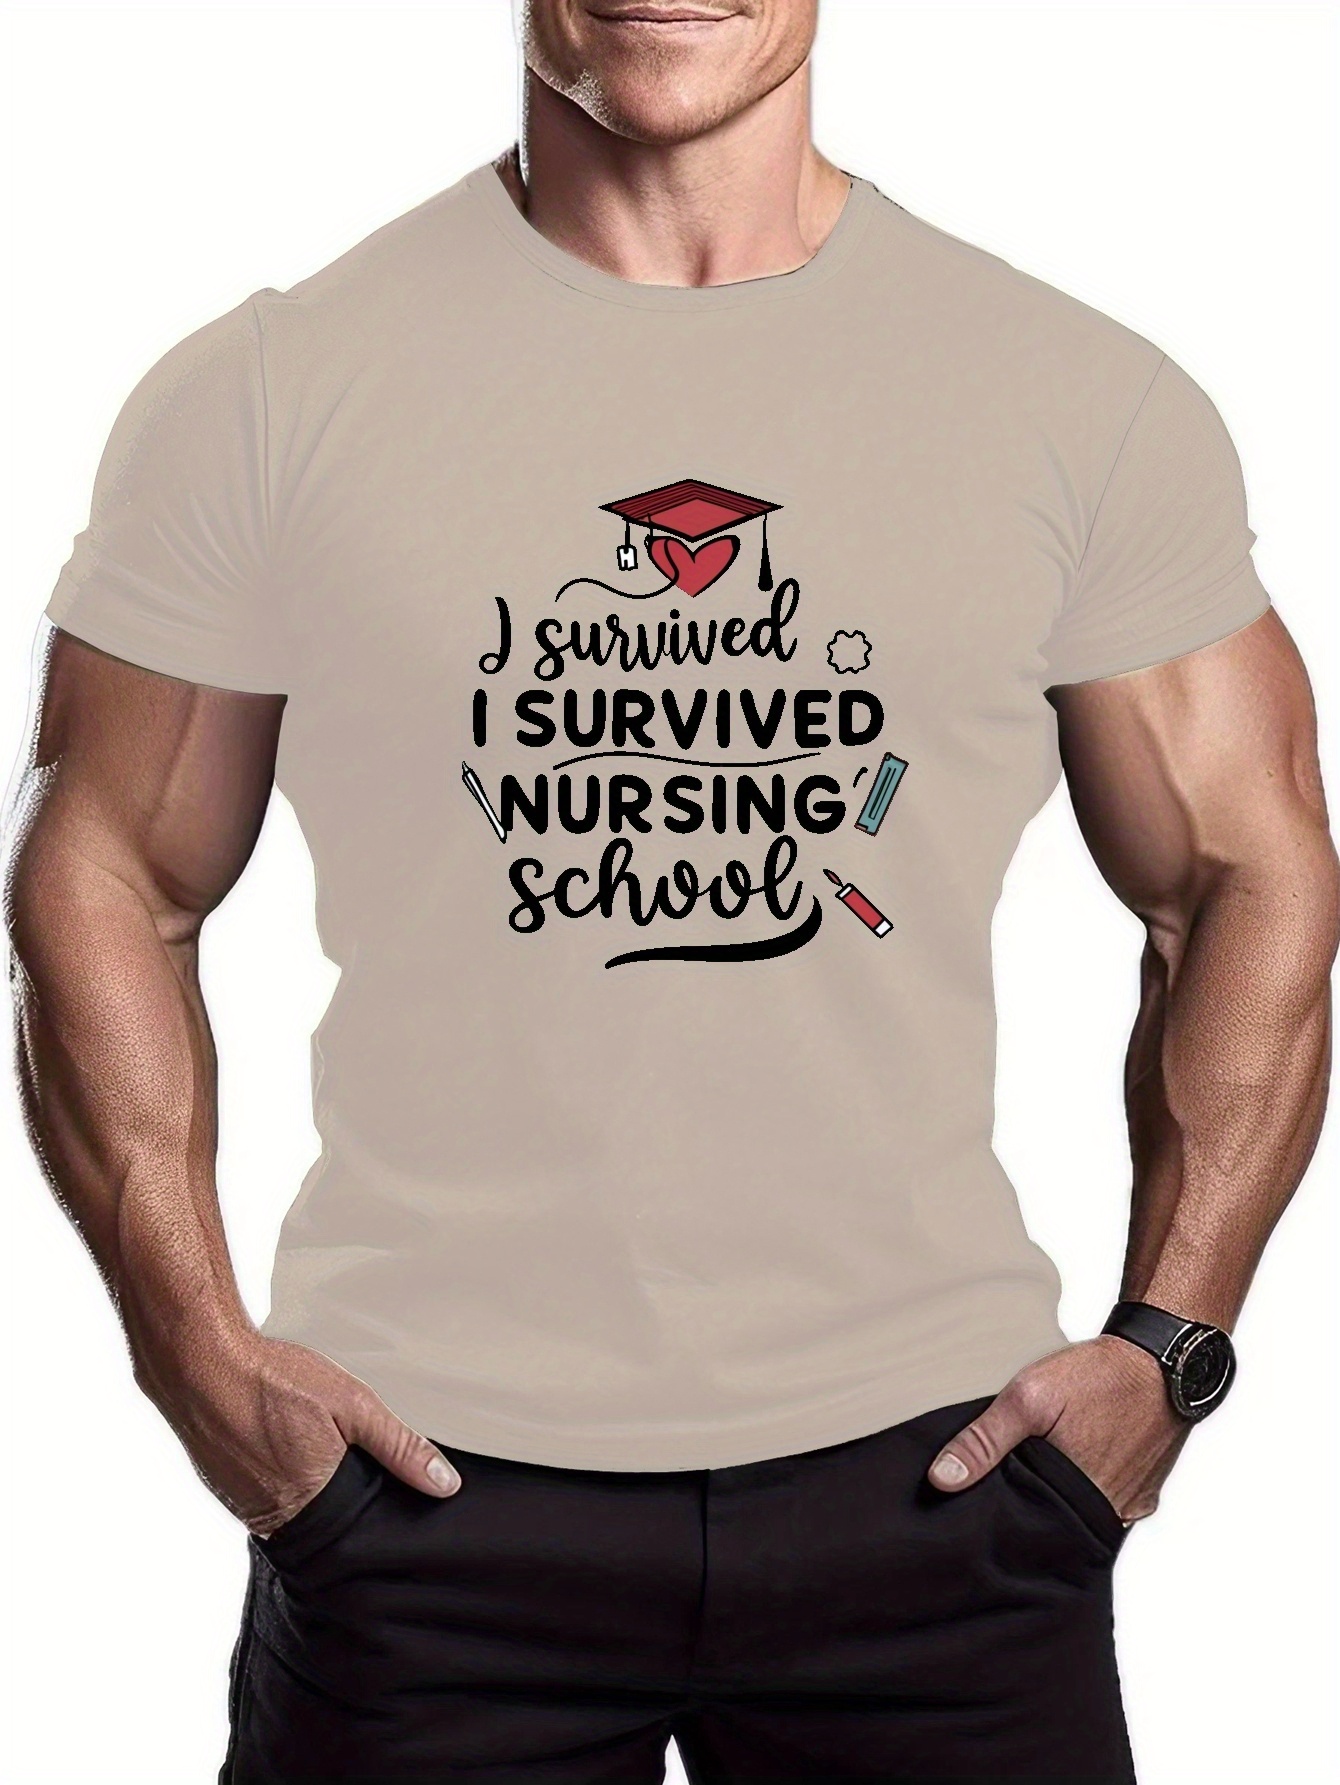 I Survived Nursing School' Print Tees For Men, Casual Crew Neck Short  Sleeve T-Shirt, Comfortable Breathable T-shirt For Summer